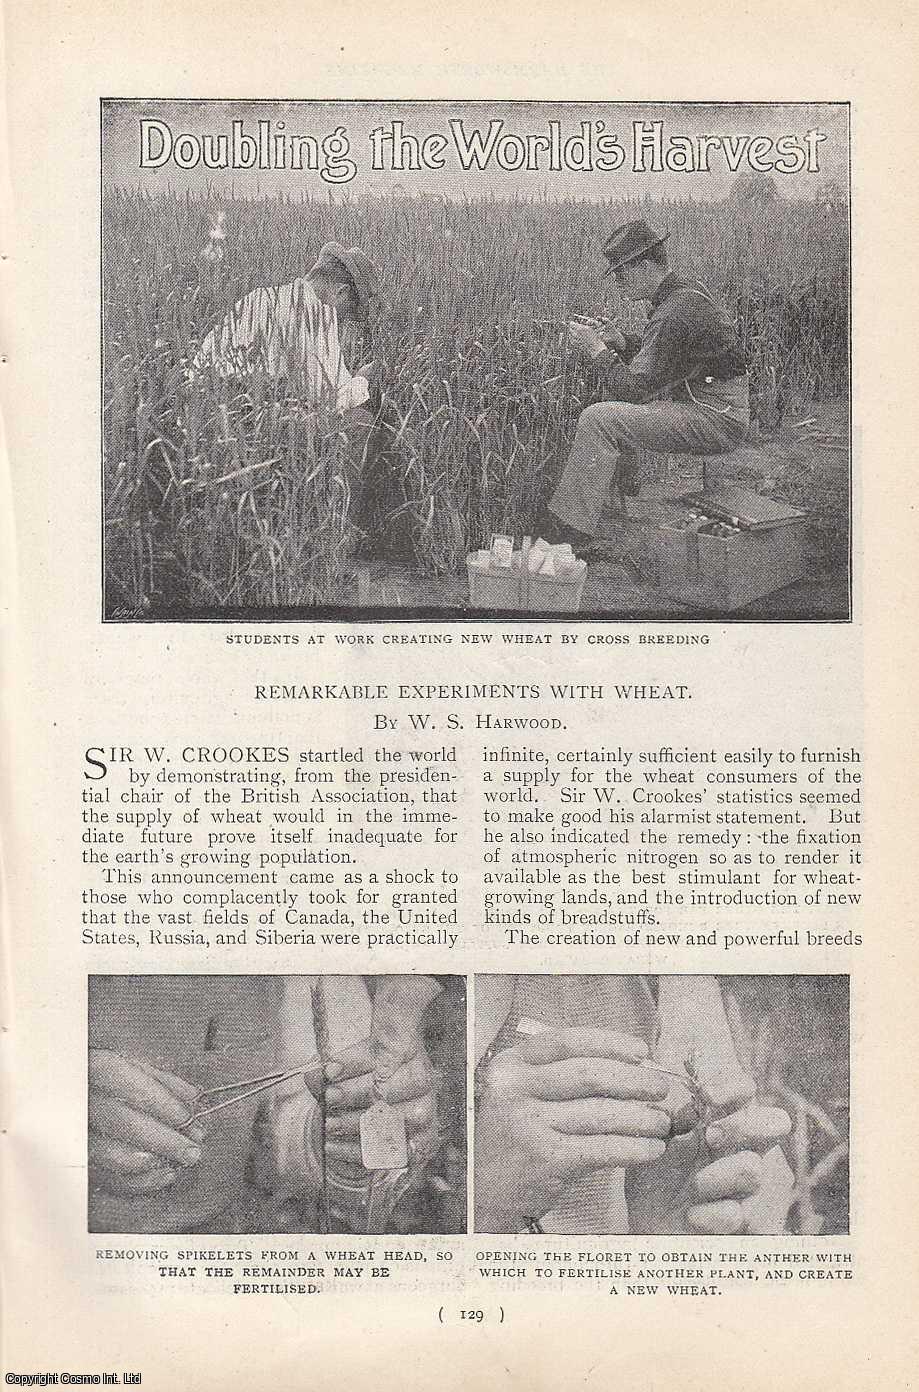 W.S. Harwood - Doubling The World's Harvest : Remarkable Experiments with Wheat. An uncommon original article from the Harmsworth London Magazine, 1901.